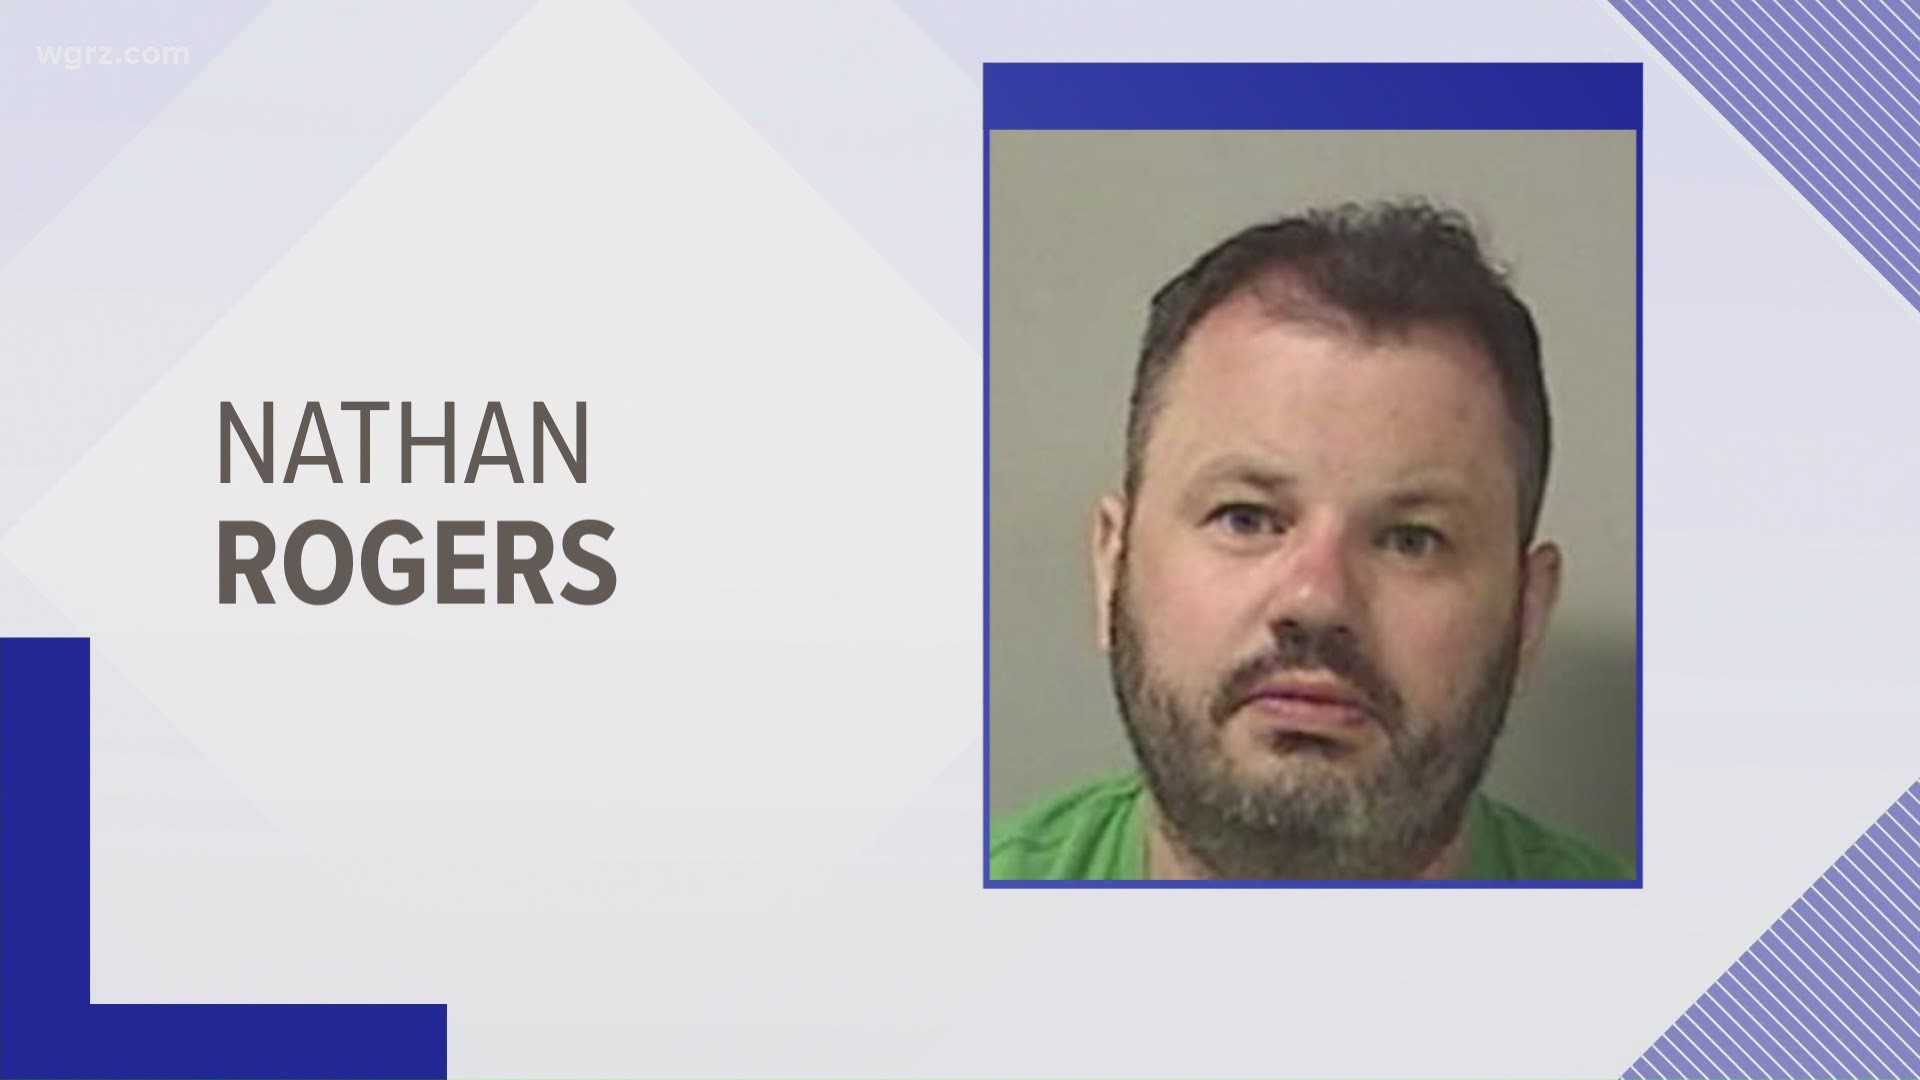 A former south towns youth pastor who's spent time in jail for recording a 12-year-old girl changing in his camper at Darien Lake is now facing federal charges.